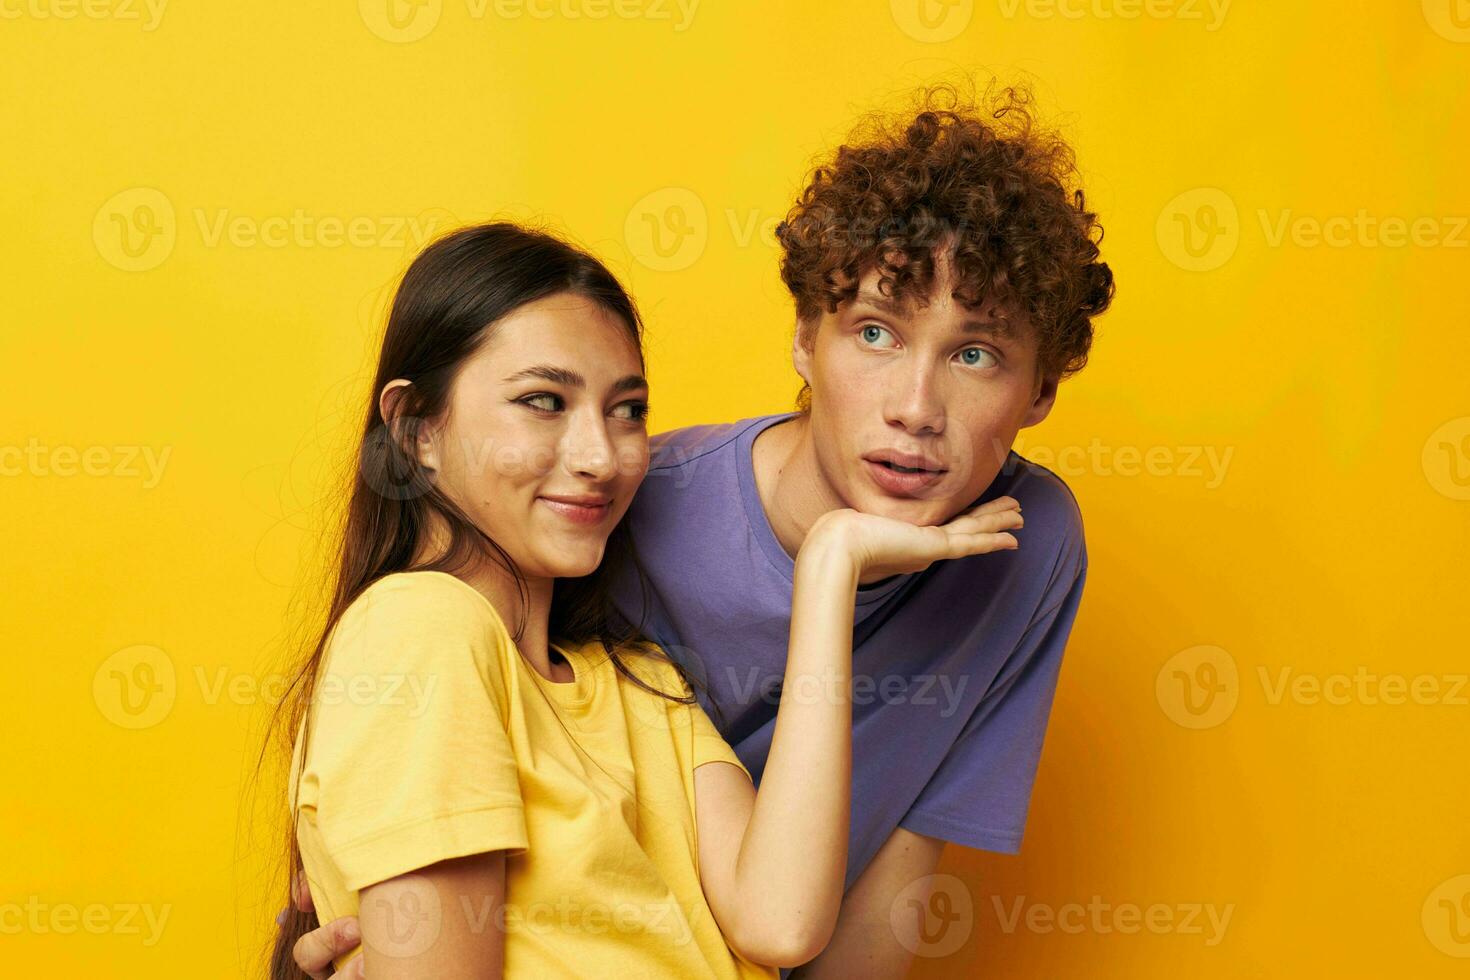 young boy and girl in colorful t-shirts posing friendship fun Lifestyle unaltered photo